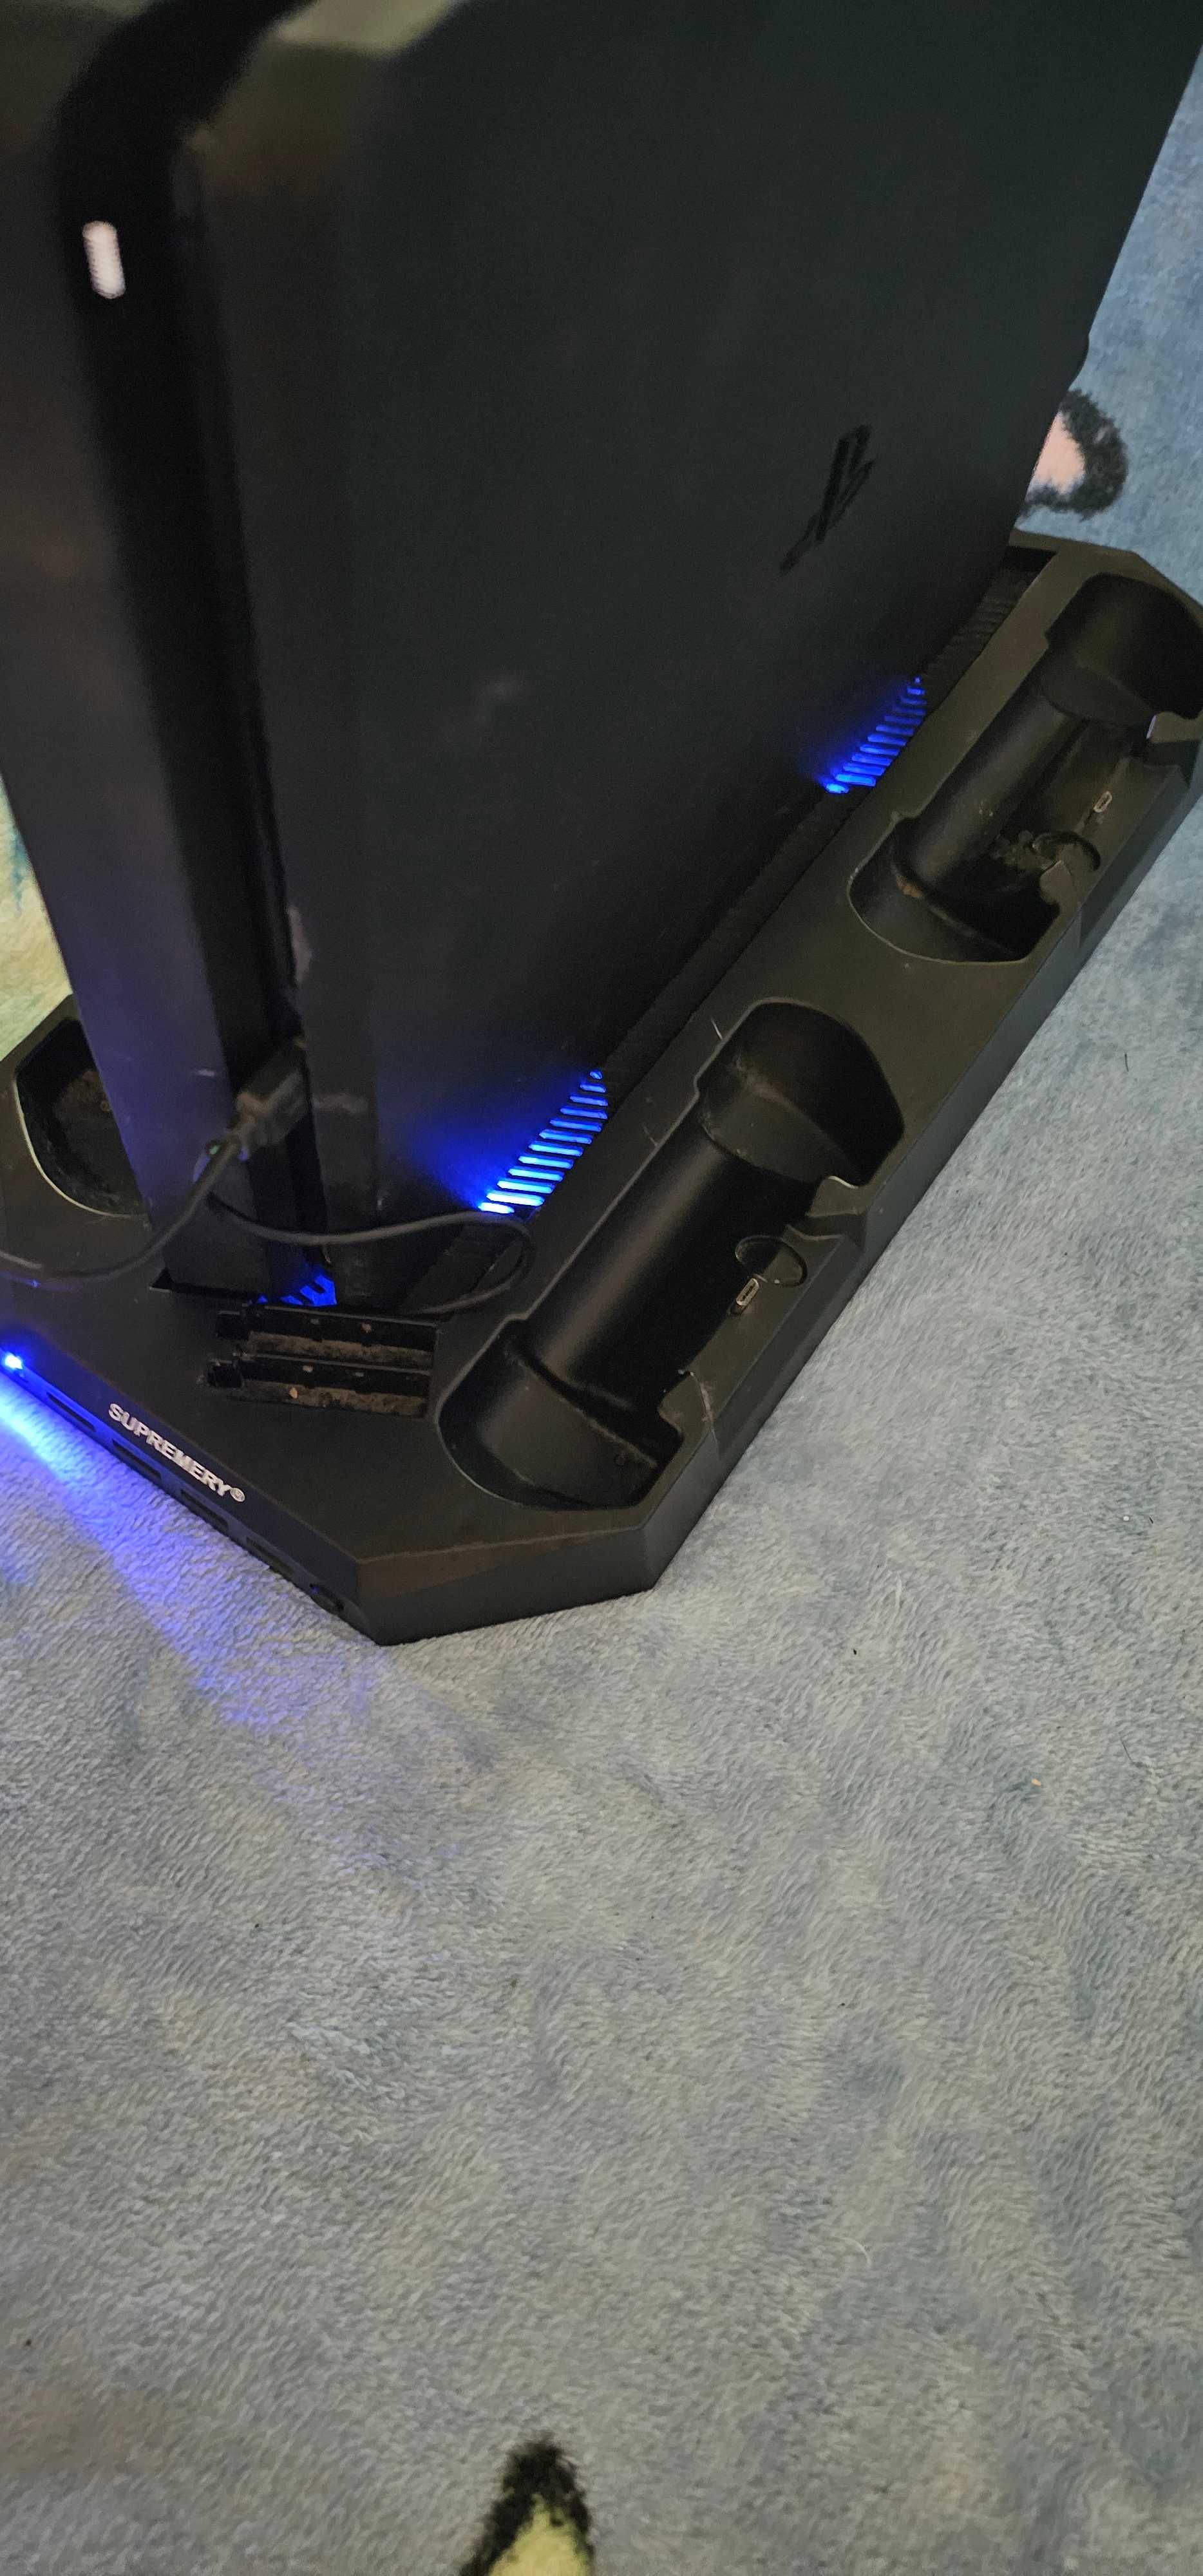 dock stand vertical ps4 incarcare 4 manete